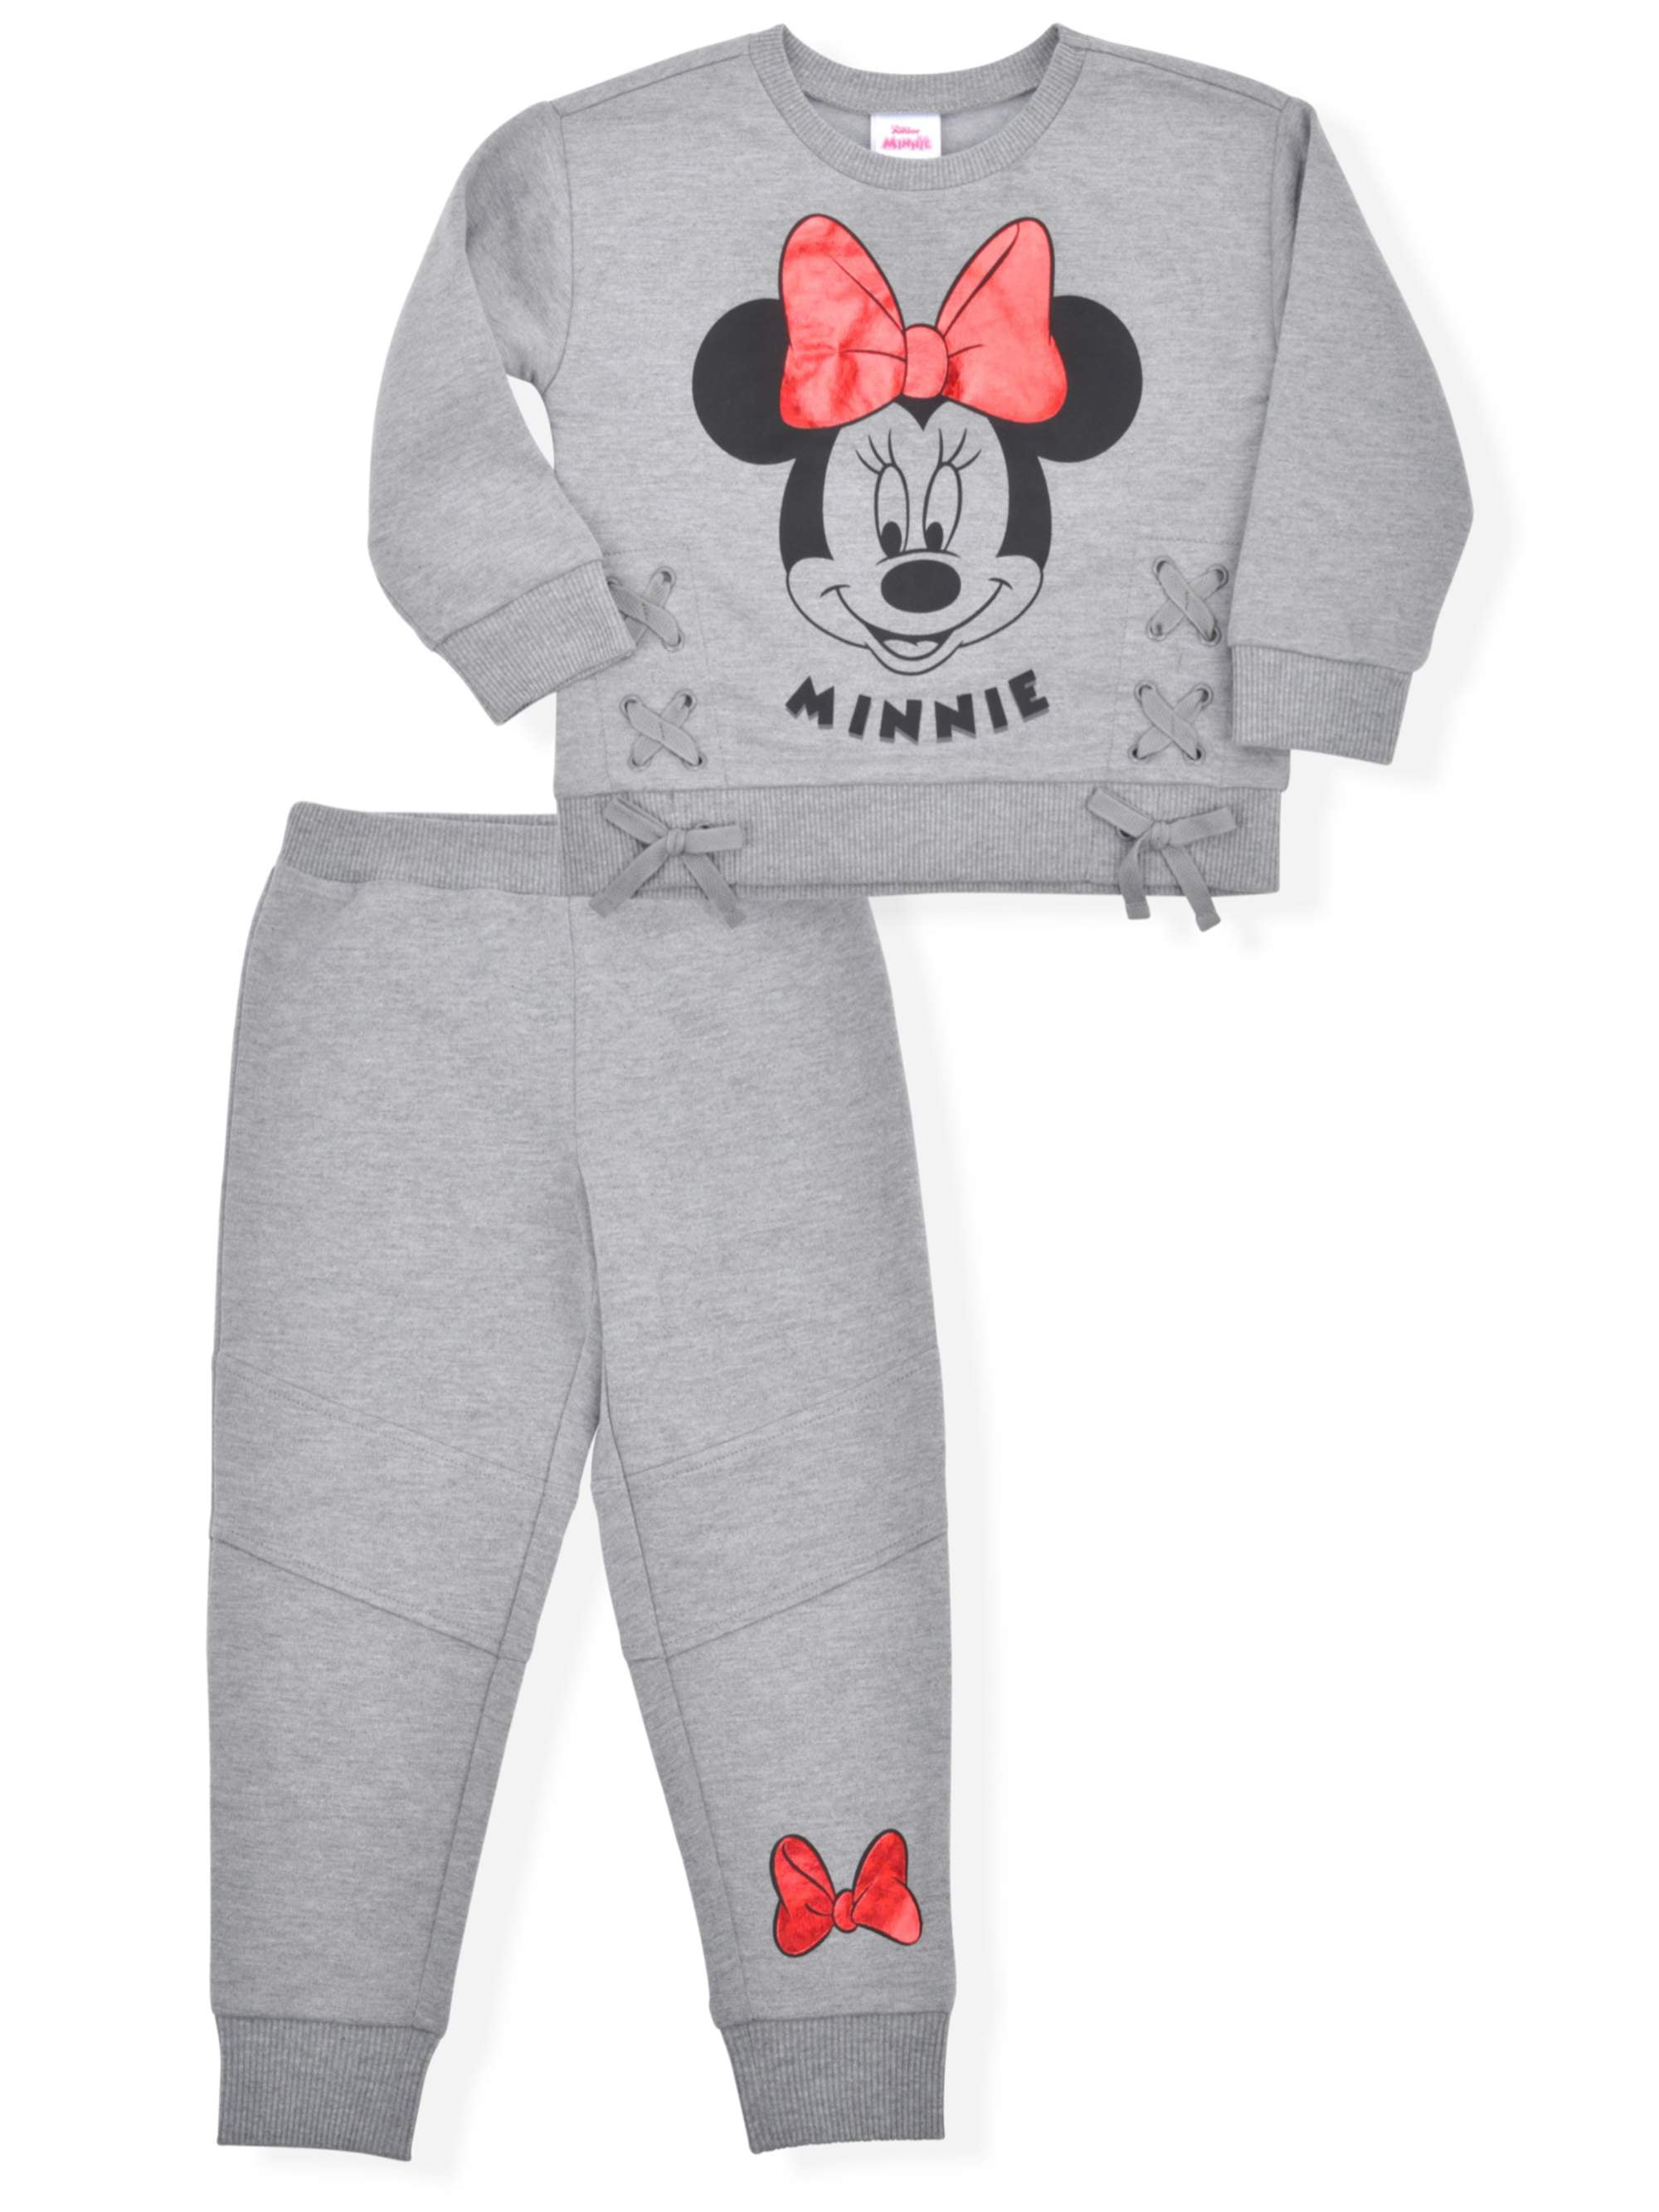 2pcs Kids Baby/Girls Minnie Mouse Long Sleeve T-Shirt Tops+Pants Clothes Sets 